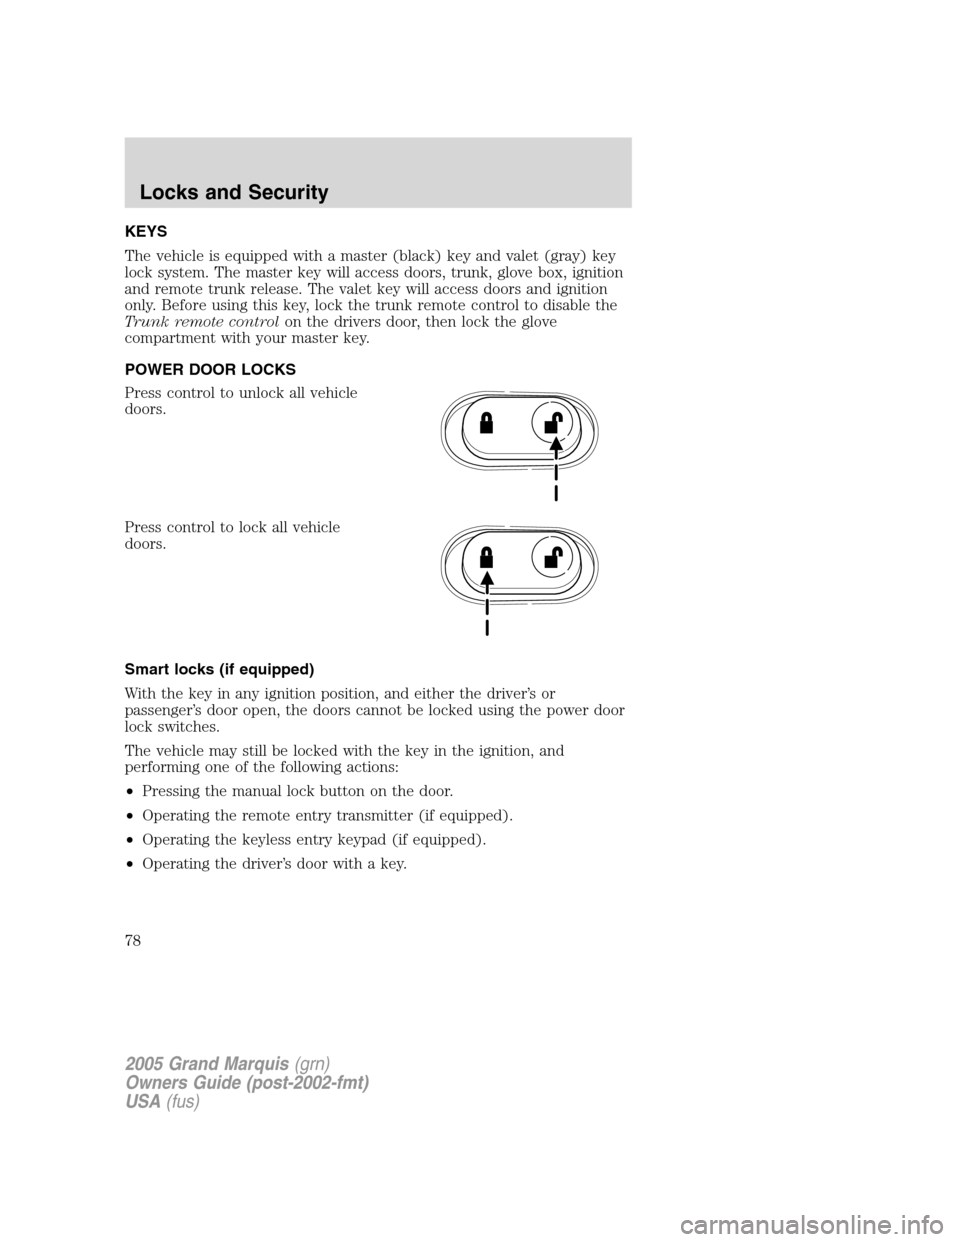 Mercury Grand Marquis 2005  s Manual PDF KEYS
The vehicle is equipped with a master (black) key and valet (gray) key
lock system. The master key will access doors, trunk, glove box, ignition
and remote trunk release. The valet key will acces